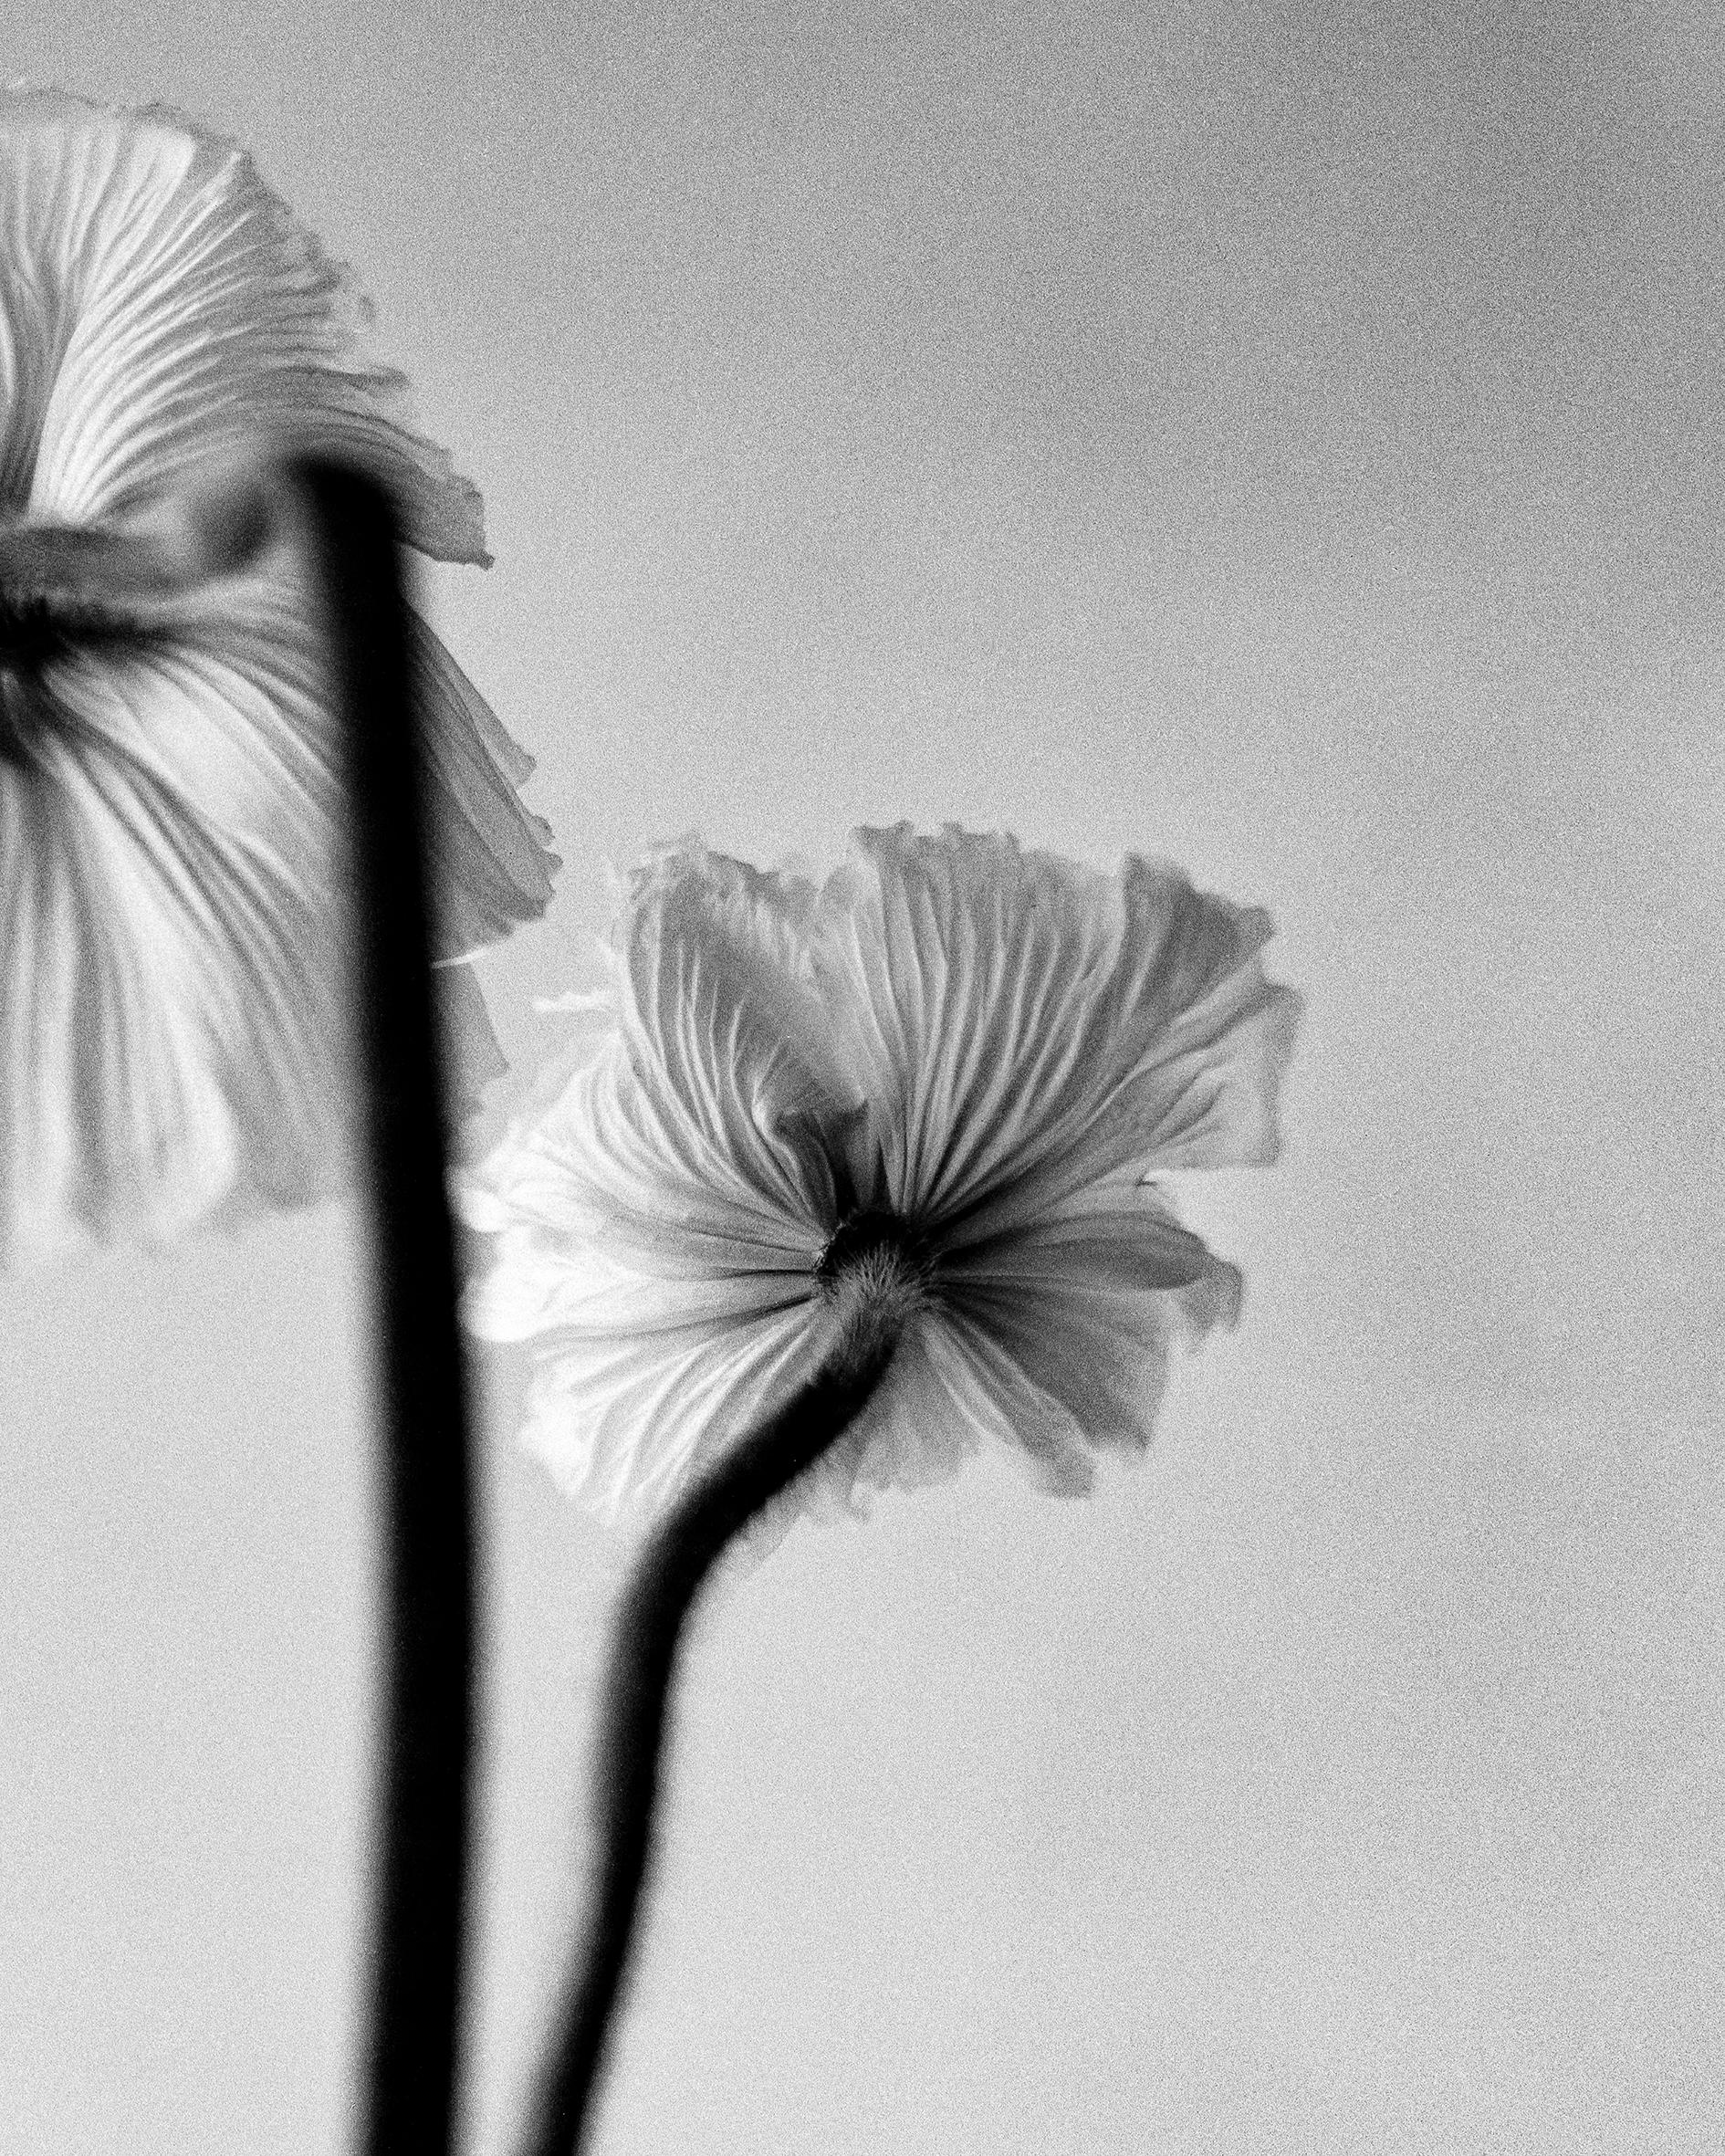 Three poppies - black and white floral photography, limited edition of 20 - Contemporary Photograph by Ugne Pouwell